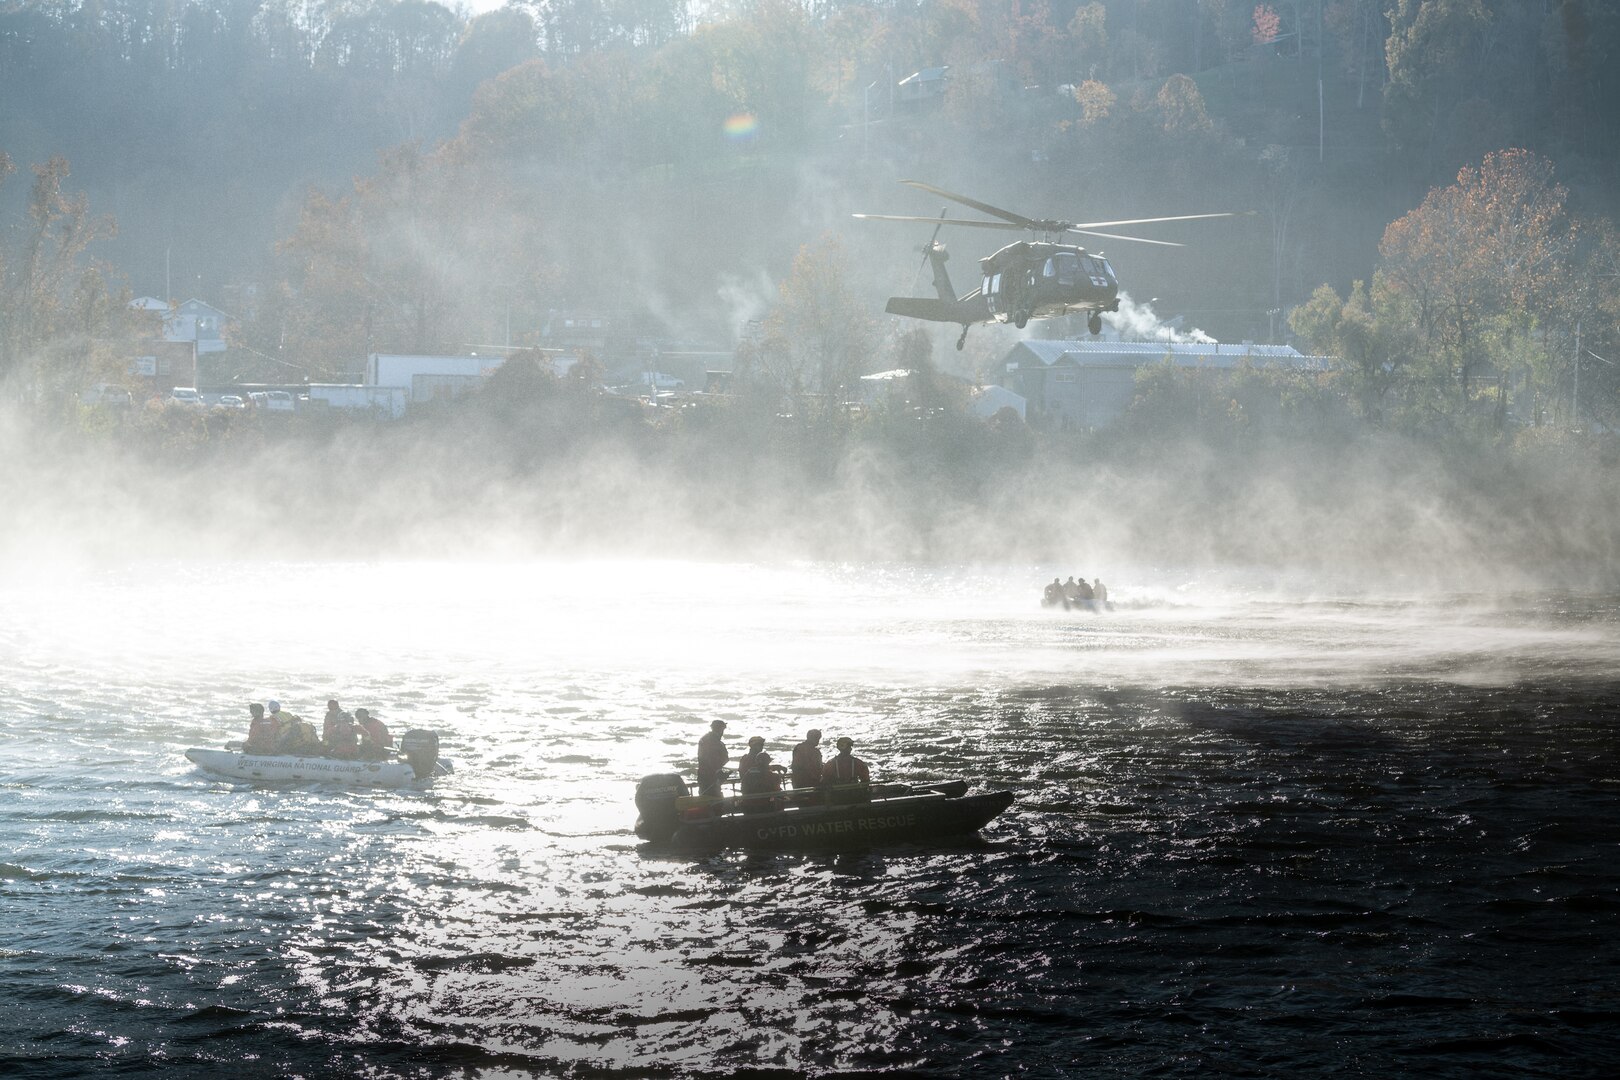 Three swift water boats below a Blackhawk helicopter, in a silhouette with the sun behind and rotor wash creating a misty fog across the river.